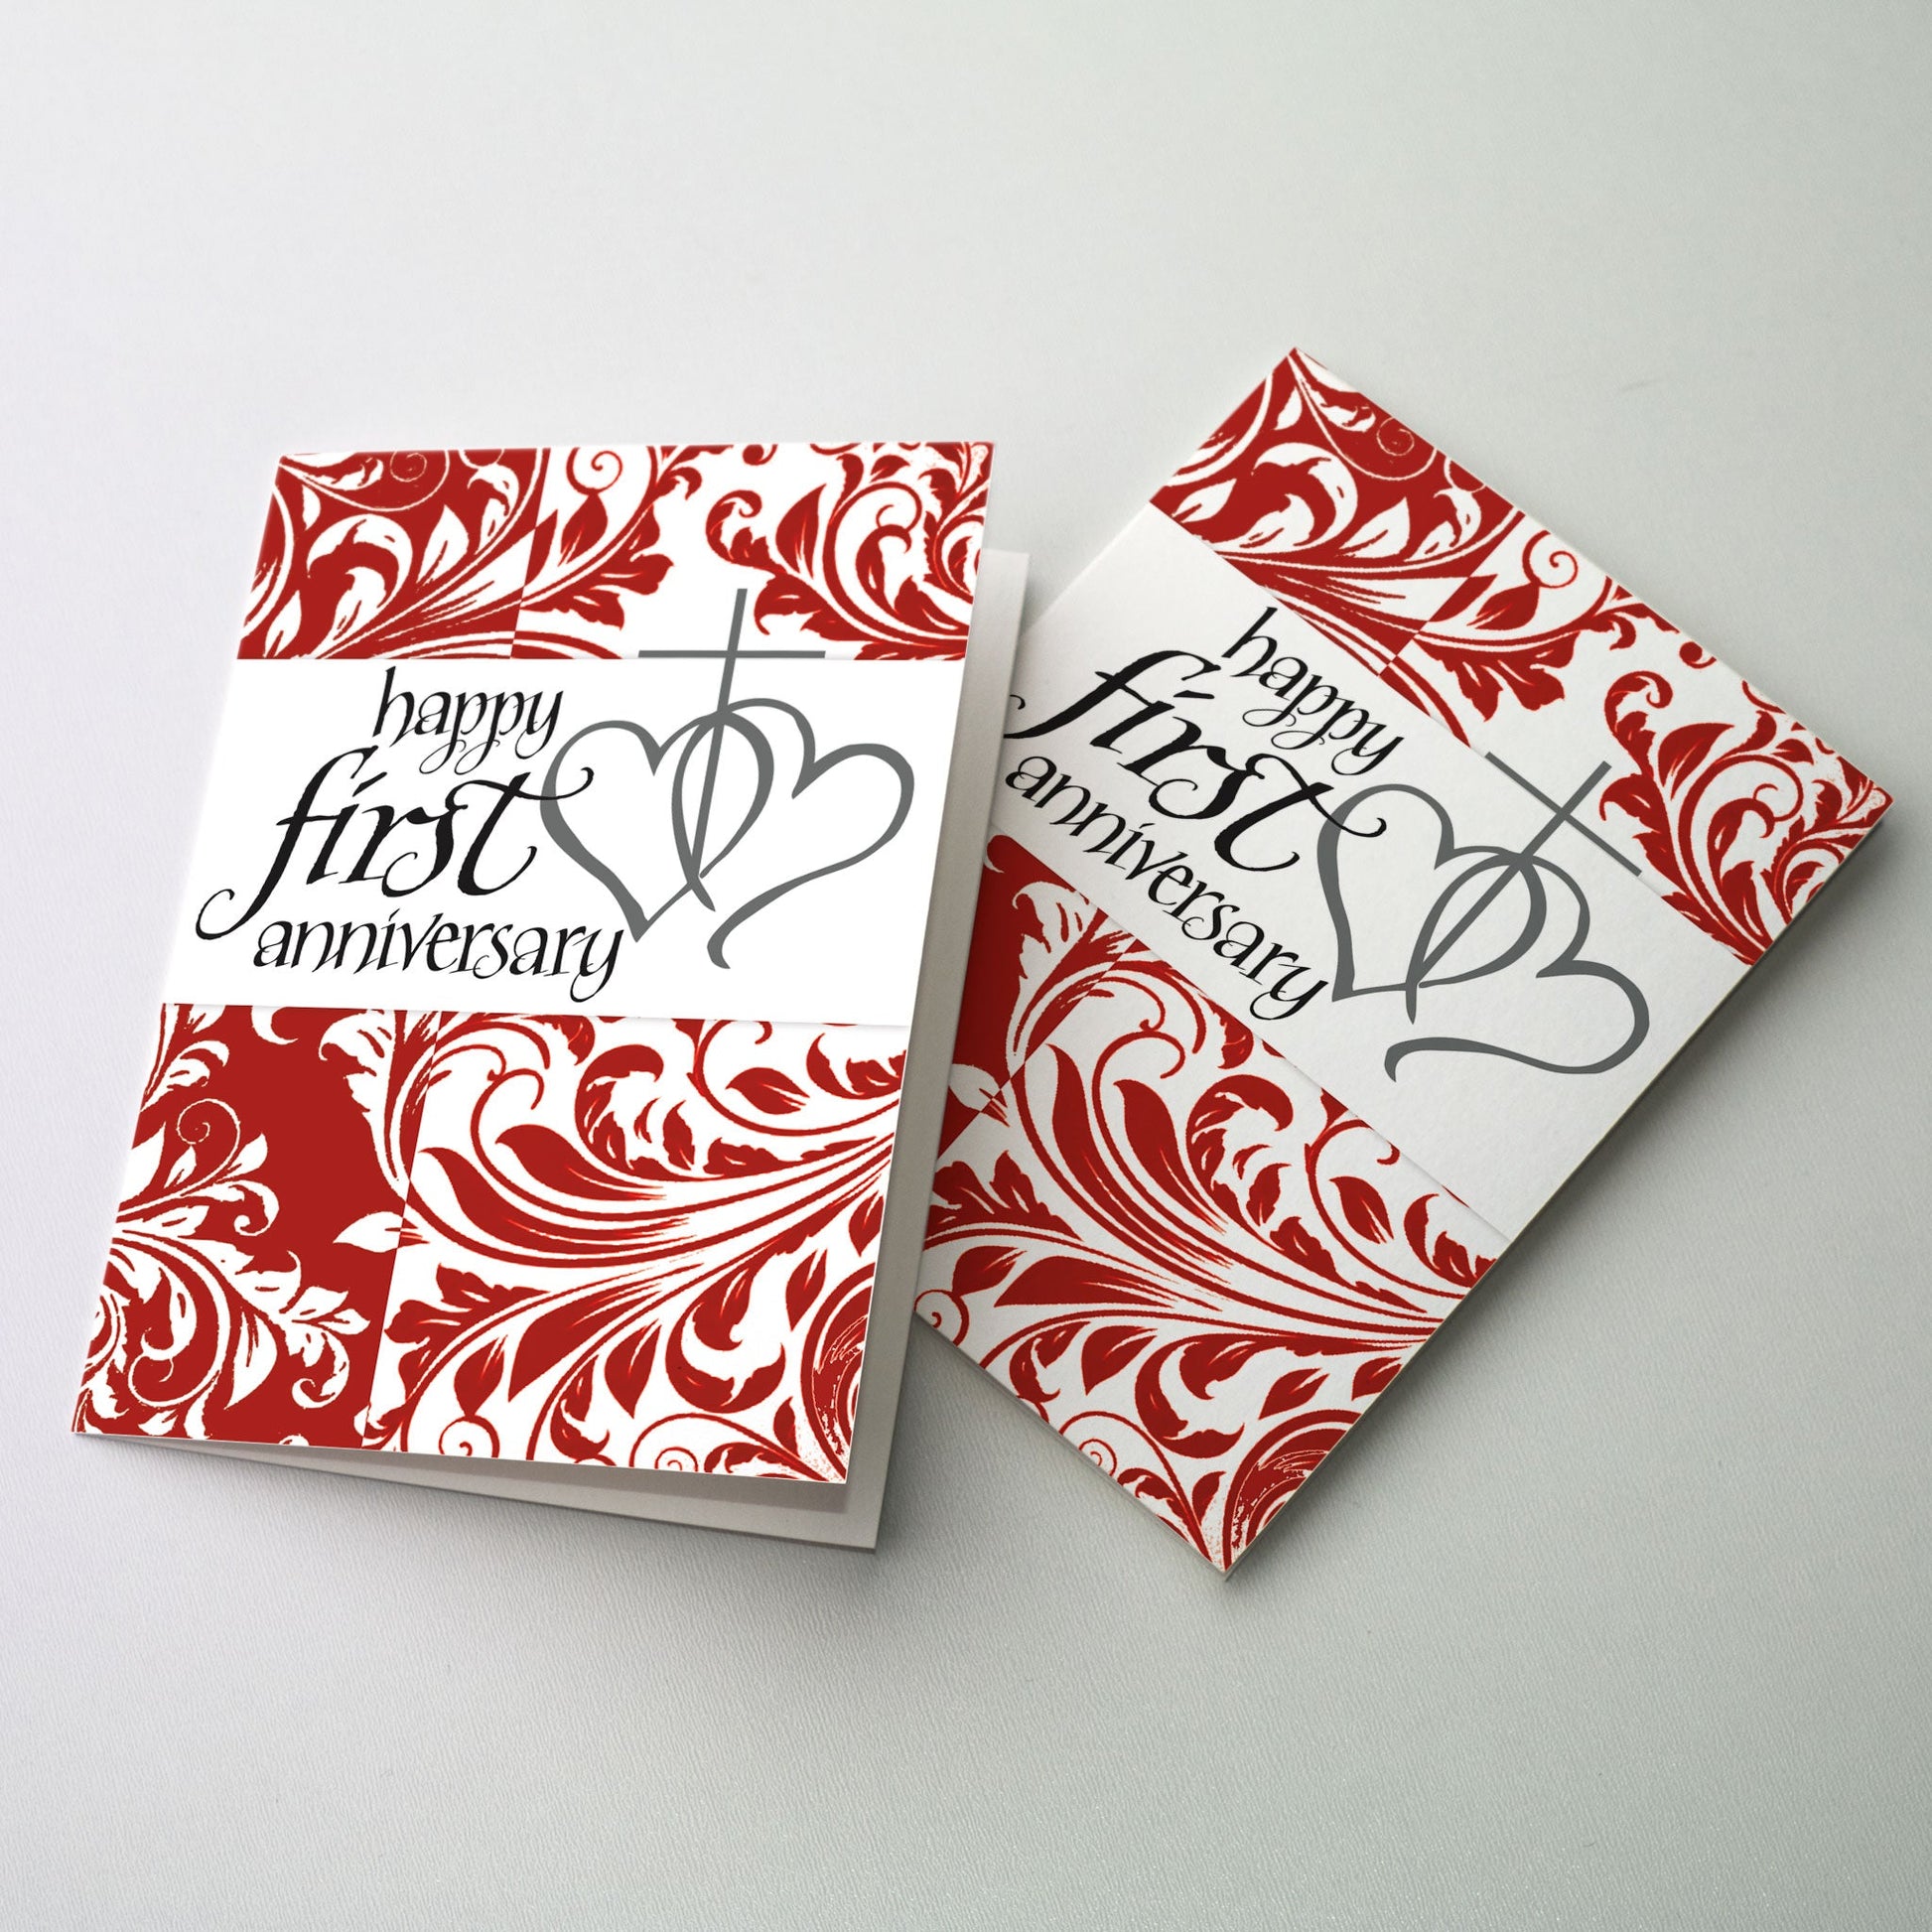 Red floral pattern with calligraphy and hearts.